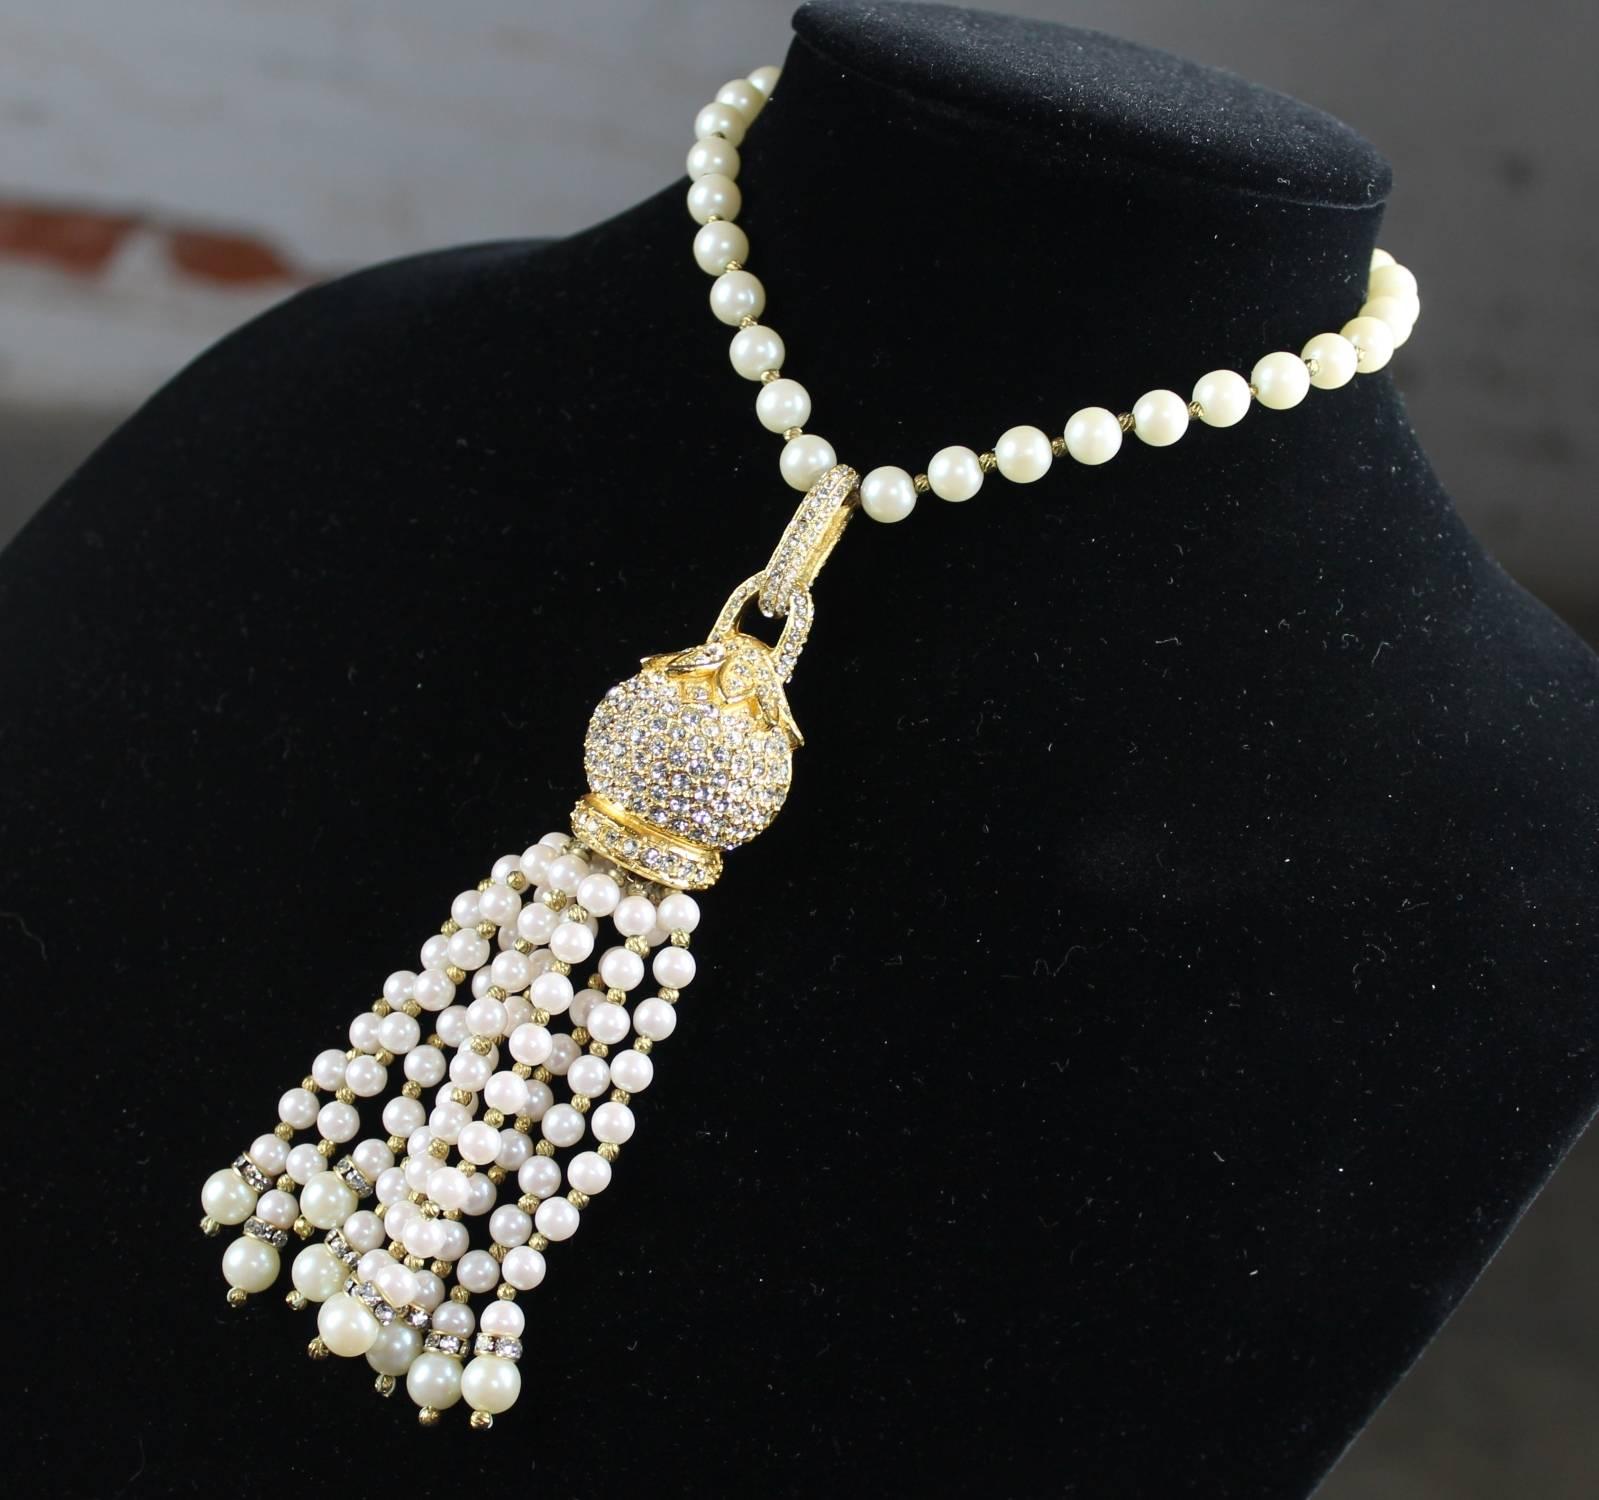 Magnificent simulated pearl, gold-tone, and rhinestone choker necklace with large tassel by Cadoro © in like-new condition.

This faux pearl and rhinestone choker necklace with its large tassel is an exceptional example of Cadoro jewelry. This